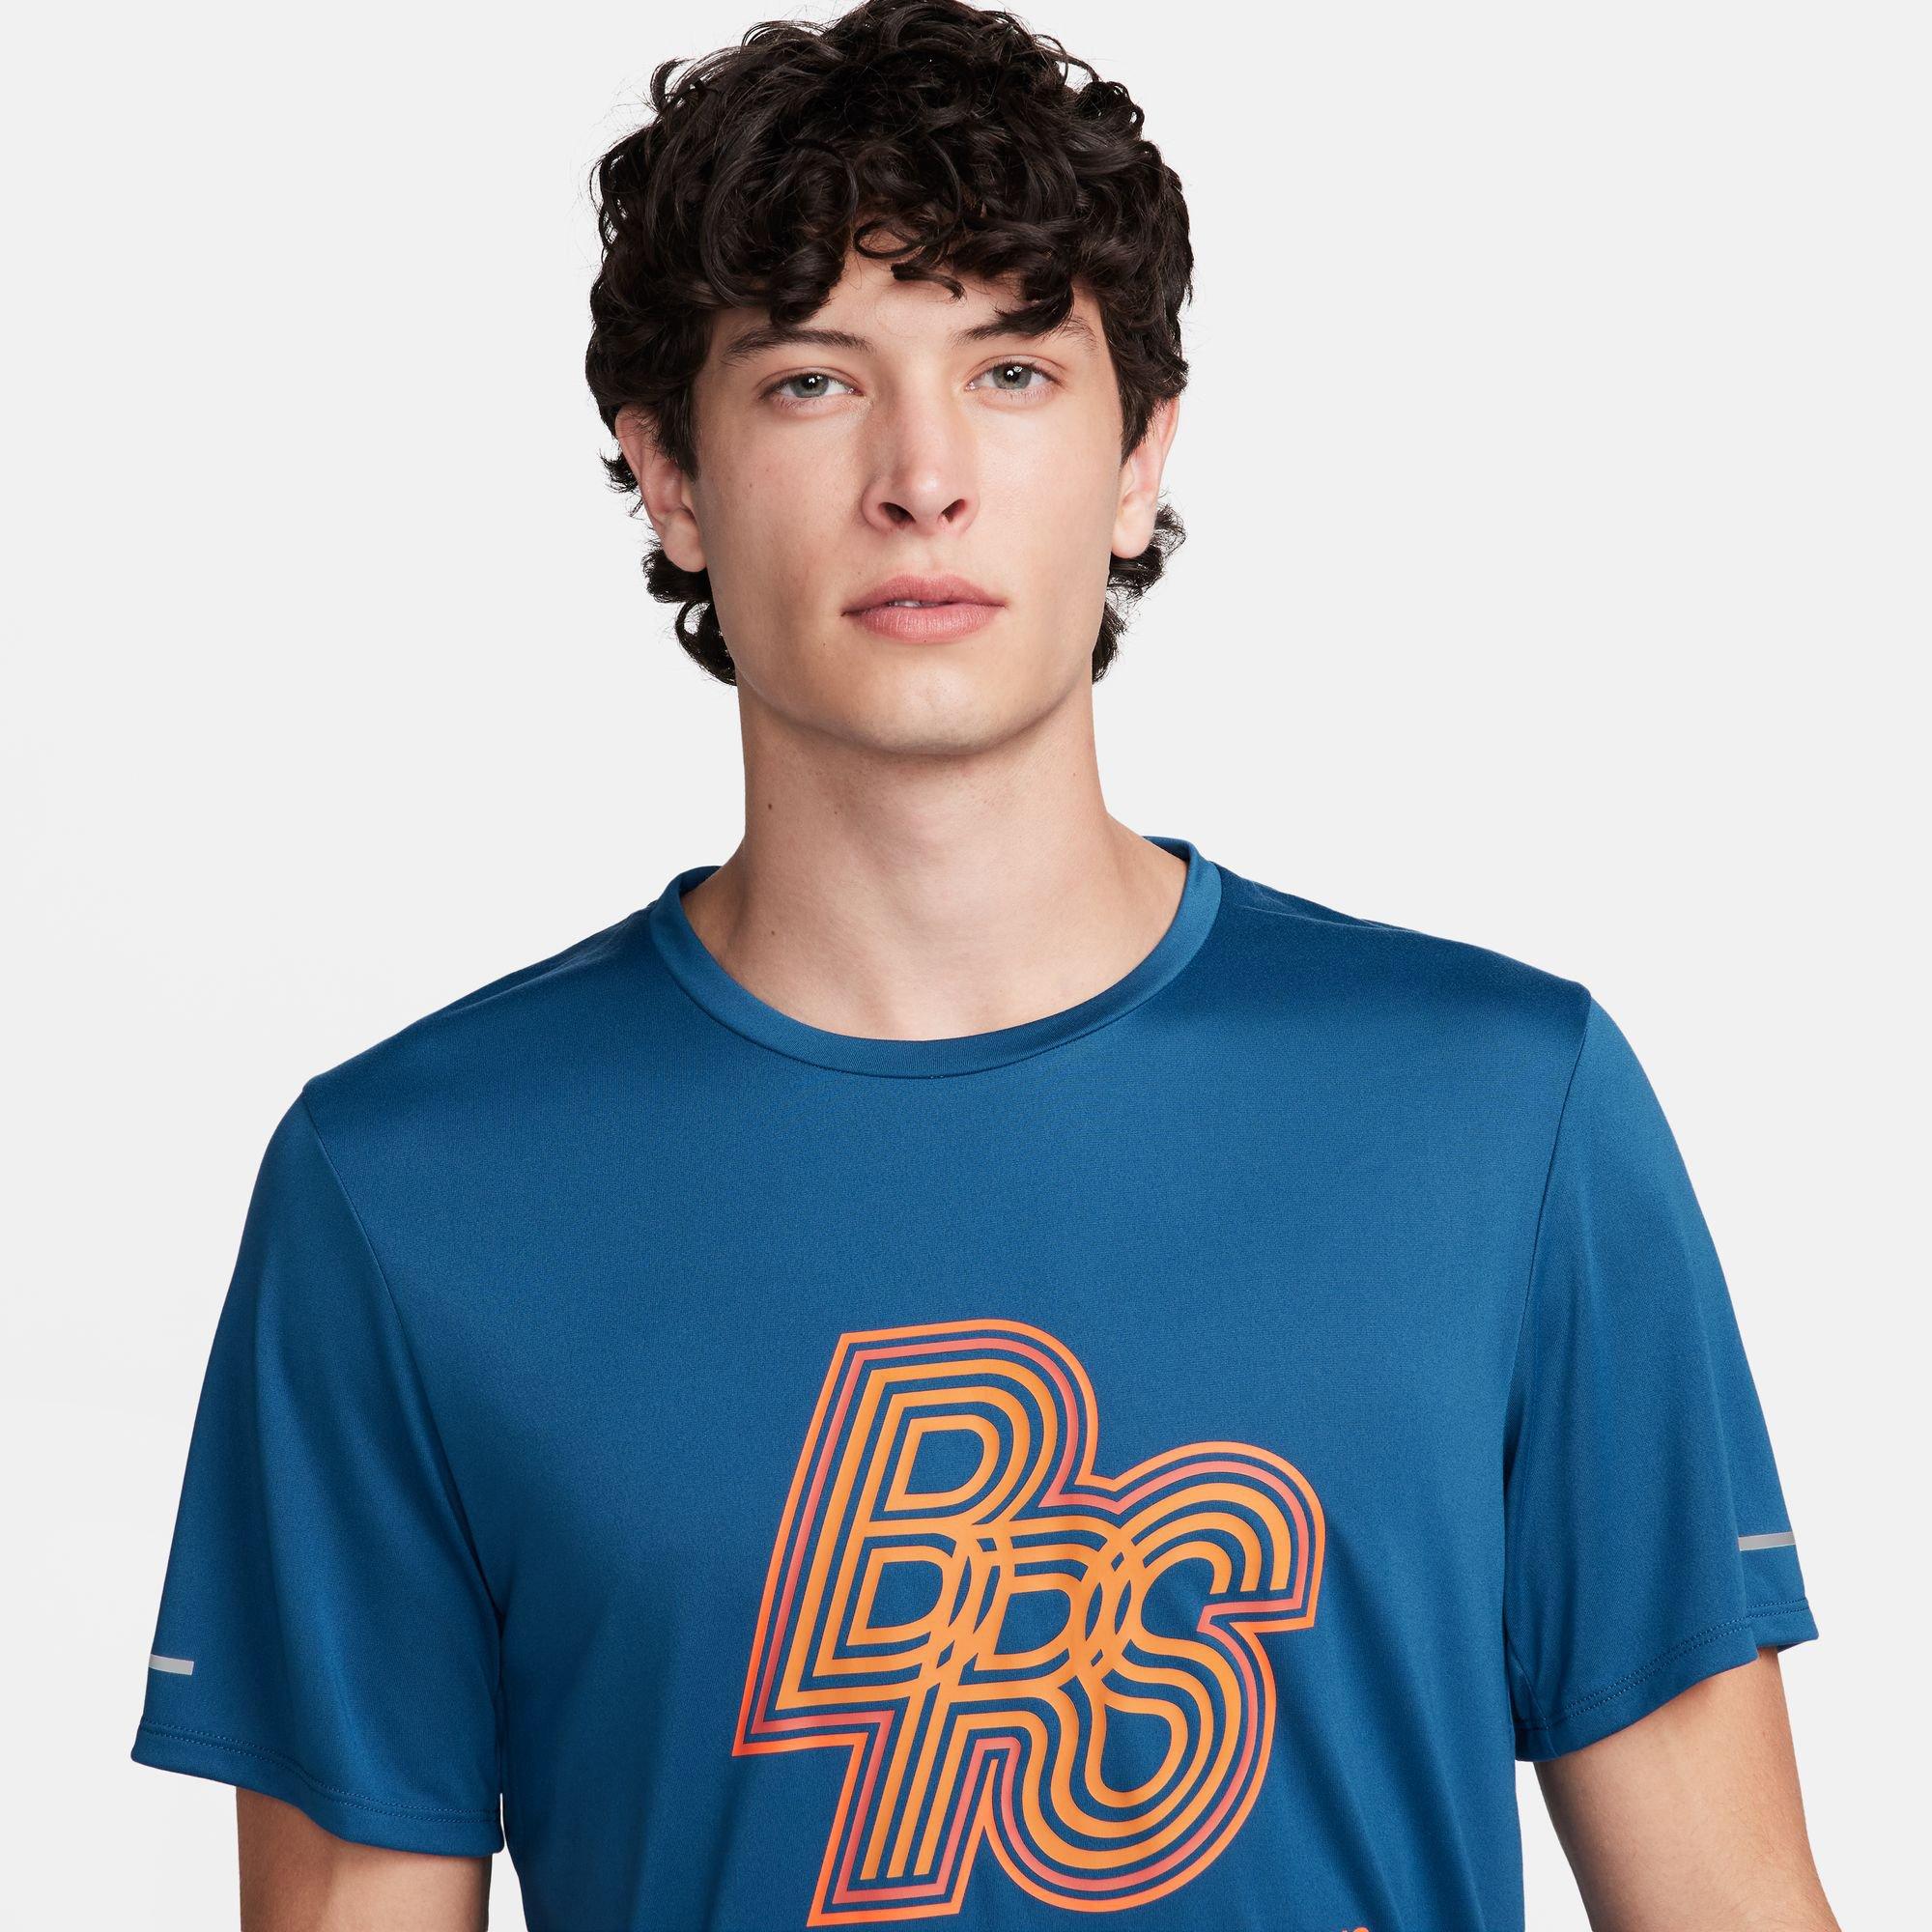 NIKE M NK RUN ENERGY RISE 365 SS T-shirt, col rond, manches courtes 